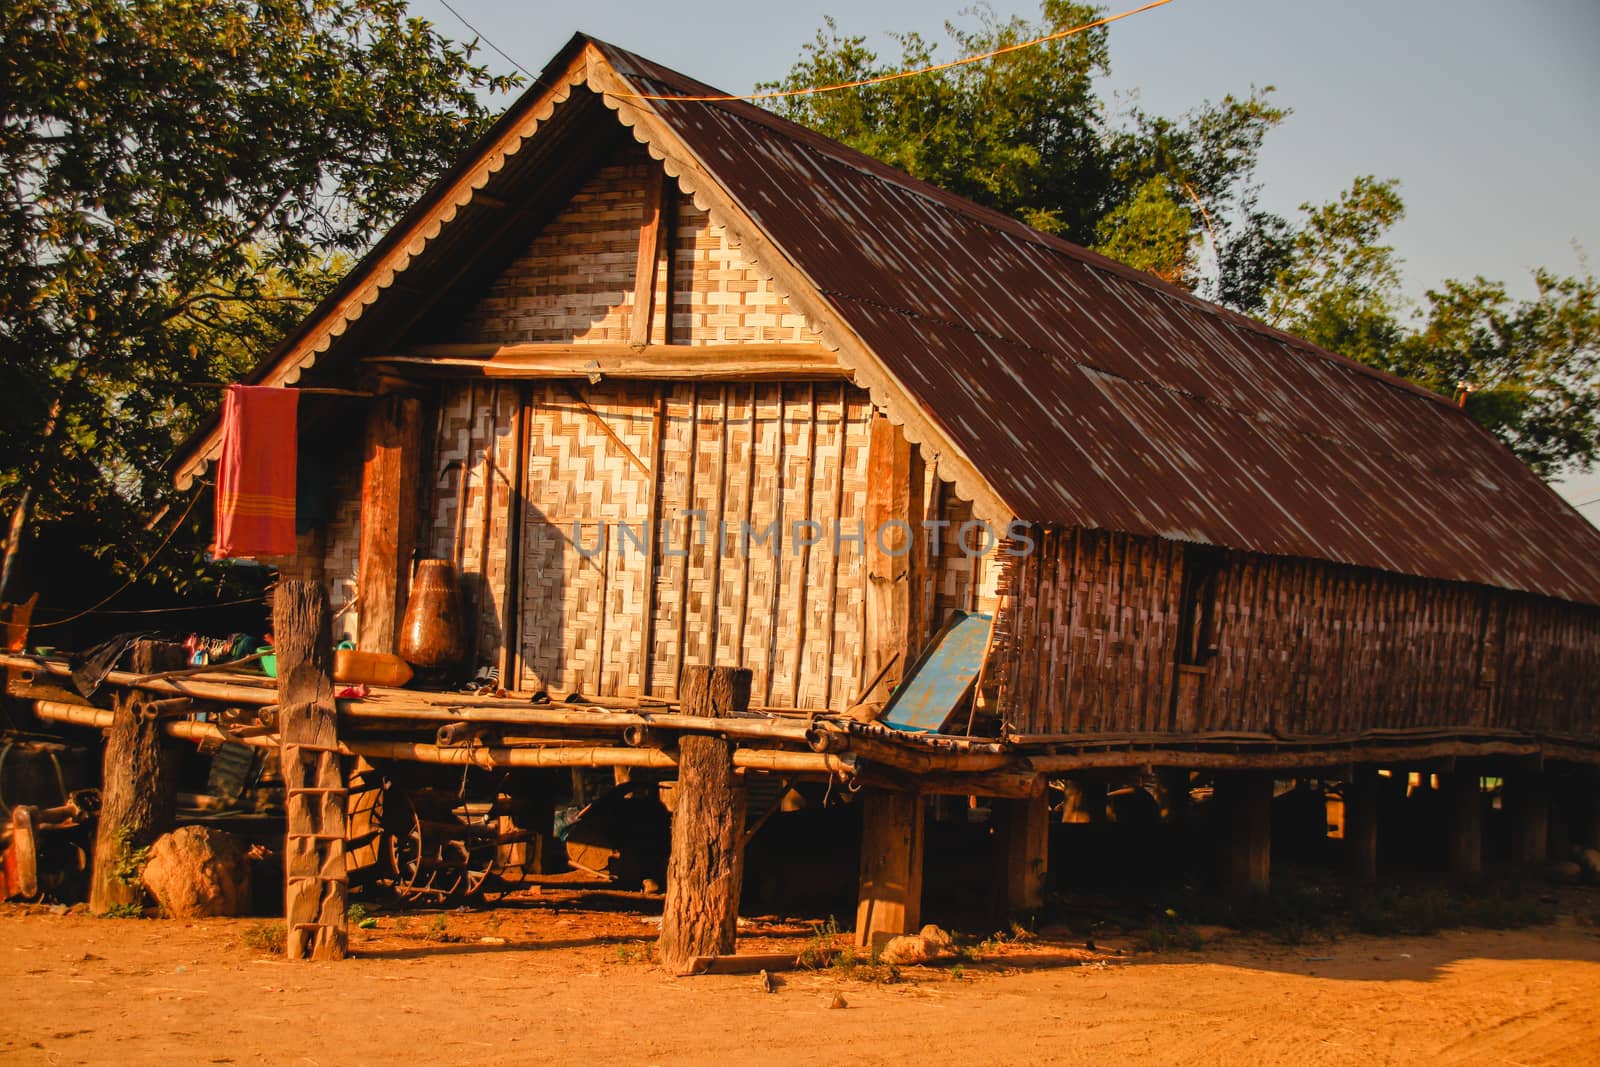 Traditional long house in Buon Don village of Dak LAk Province in the Central Highlands of Vietnam that shows the life, culture and tradition of Vietnamese ethnic tribe